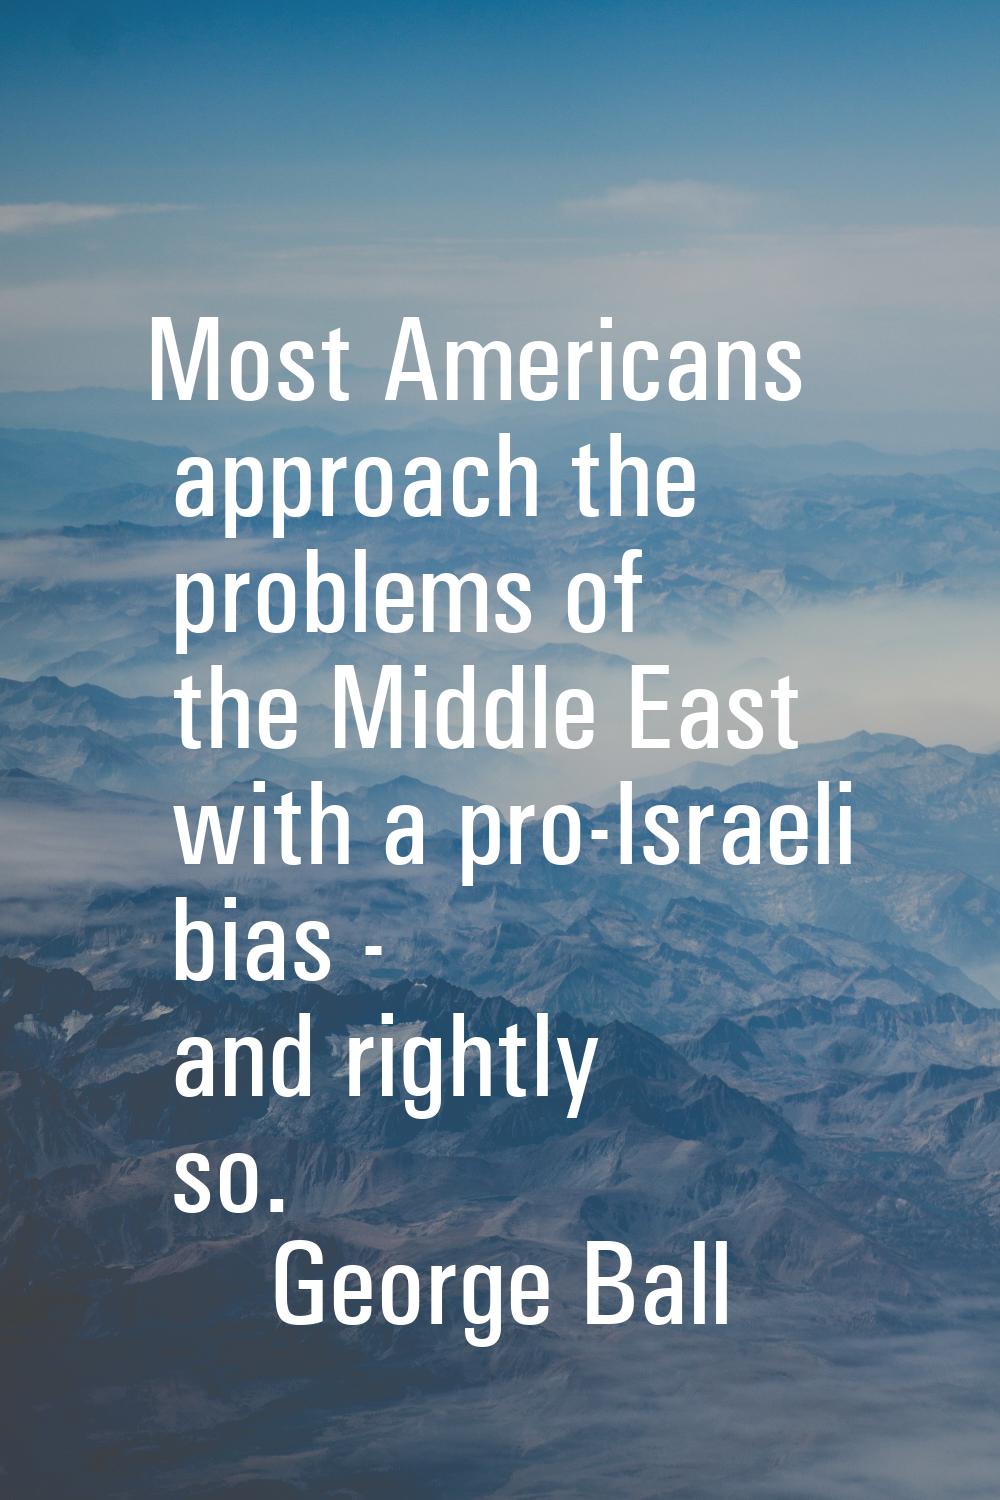 Most Americans approach the problems of the Middle East with a pro-Israeli bias - and rightly so.